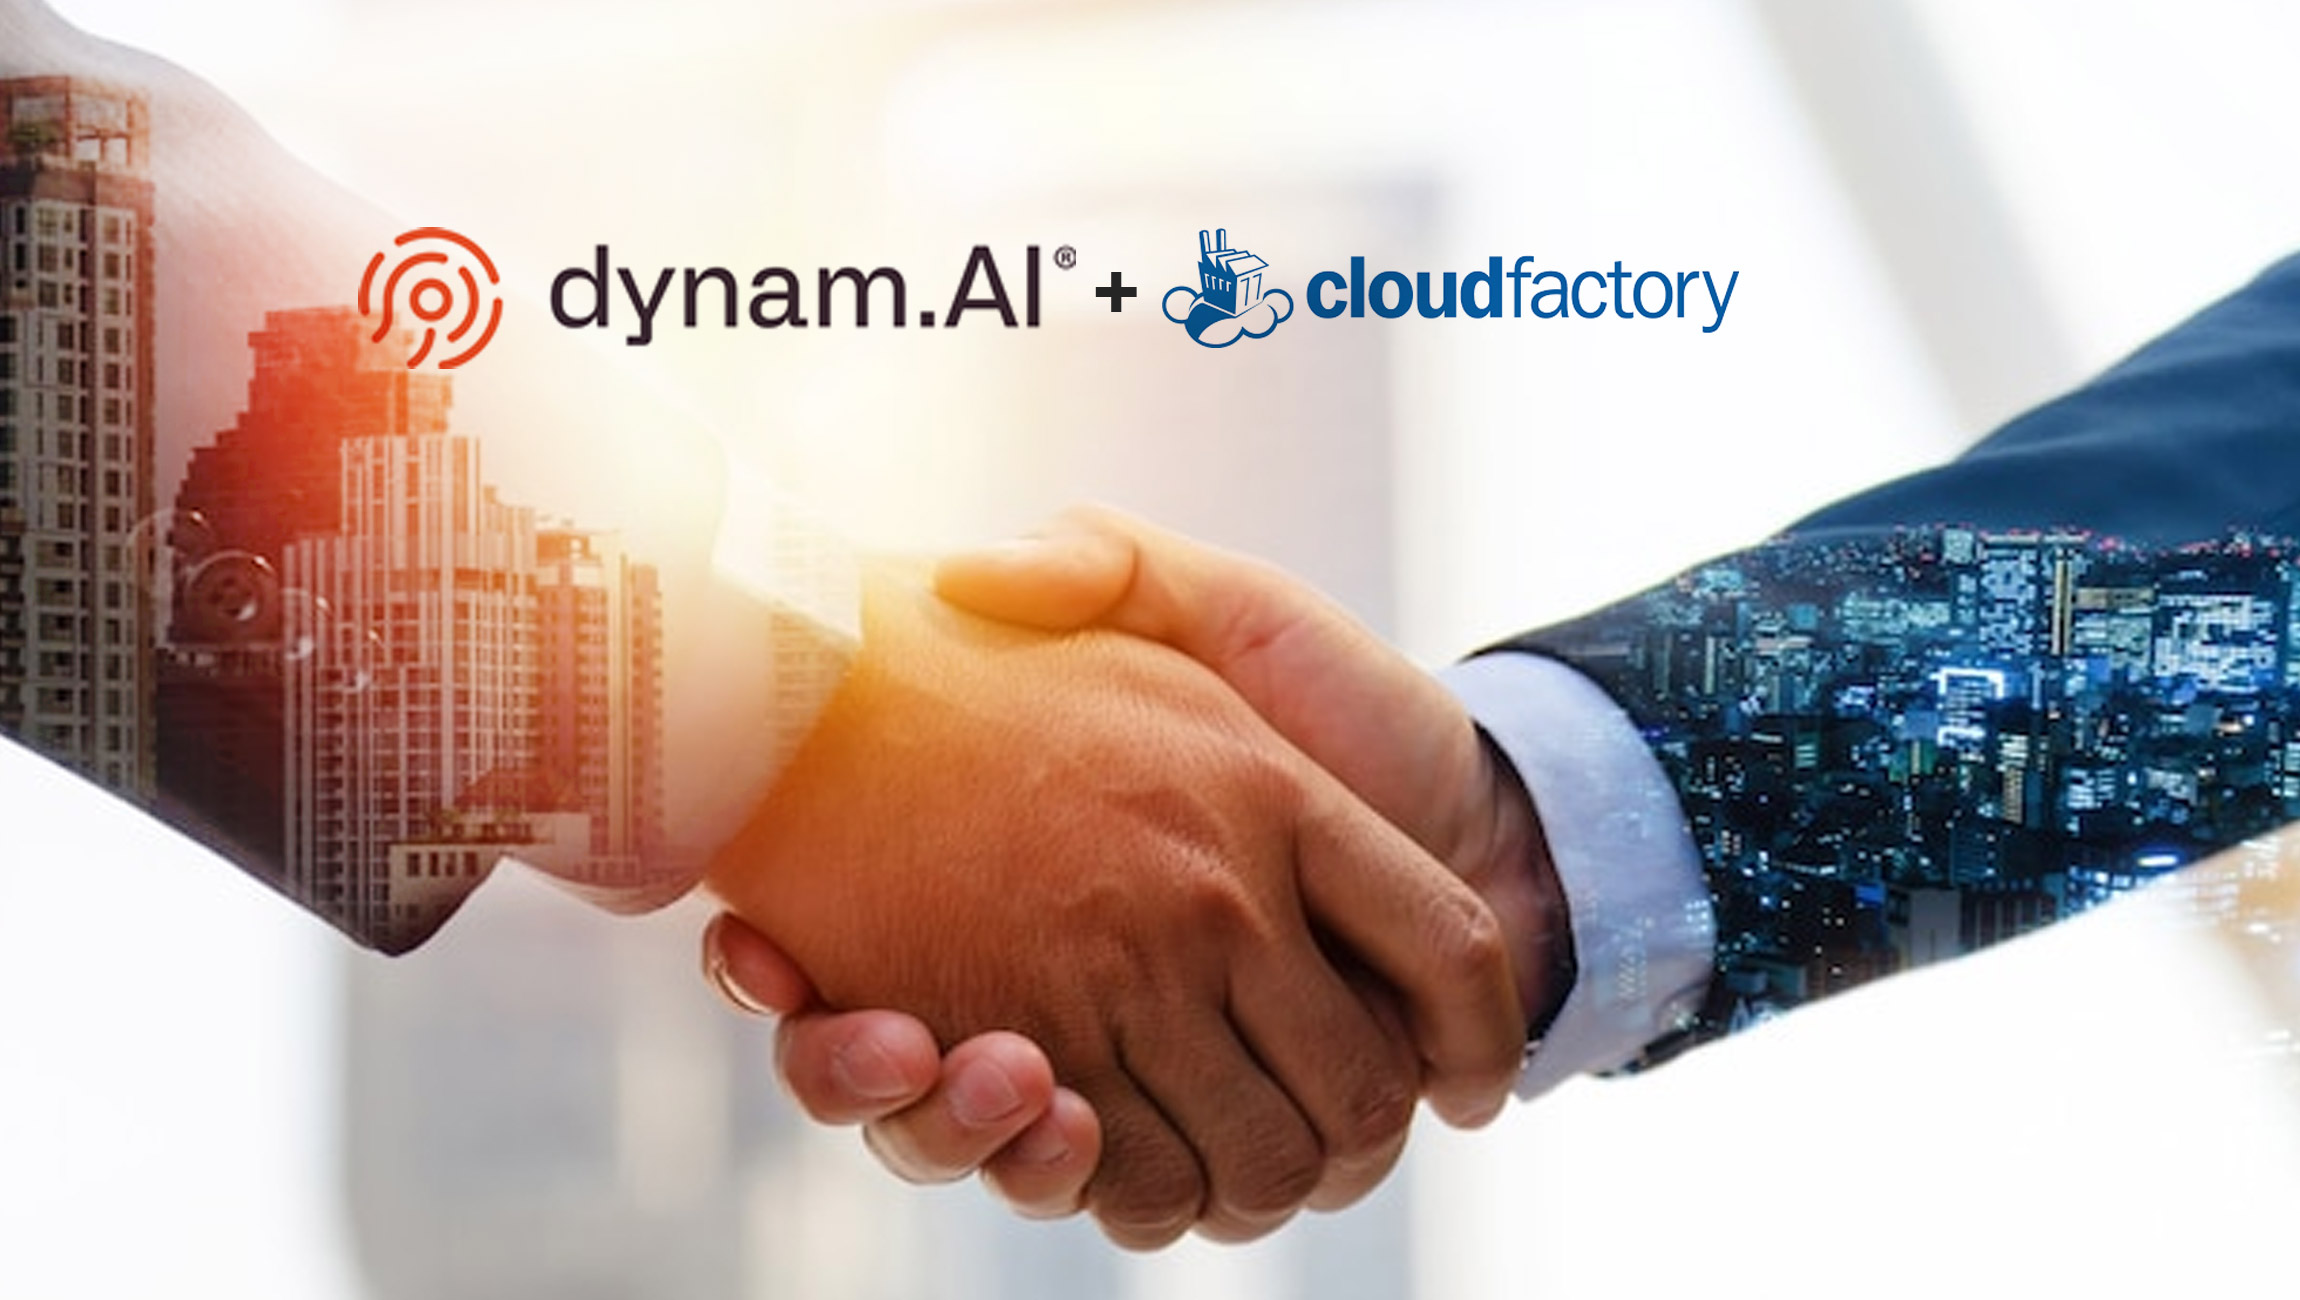 Dynam.AI and CloudFactory Create Partnership to Accelerate AI for Decision Intelligence